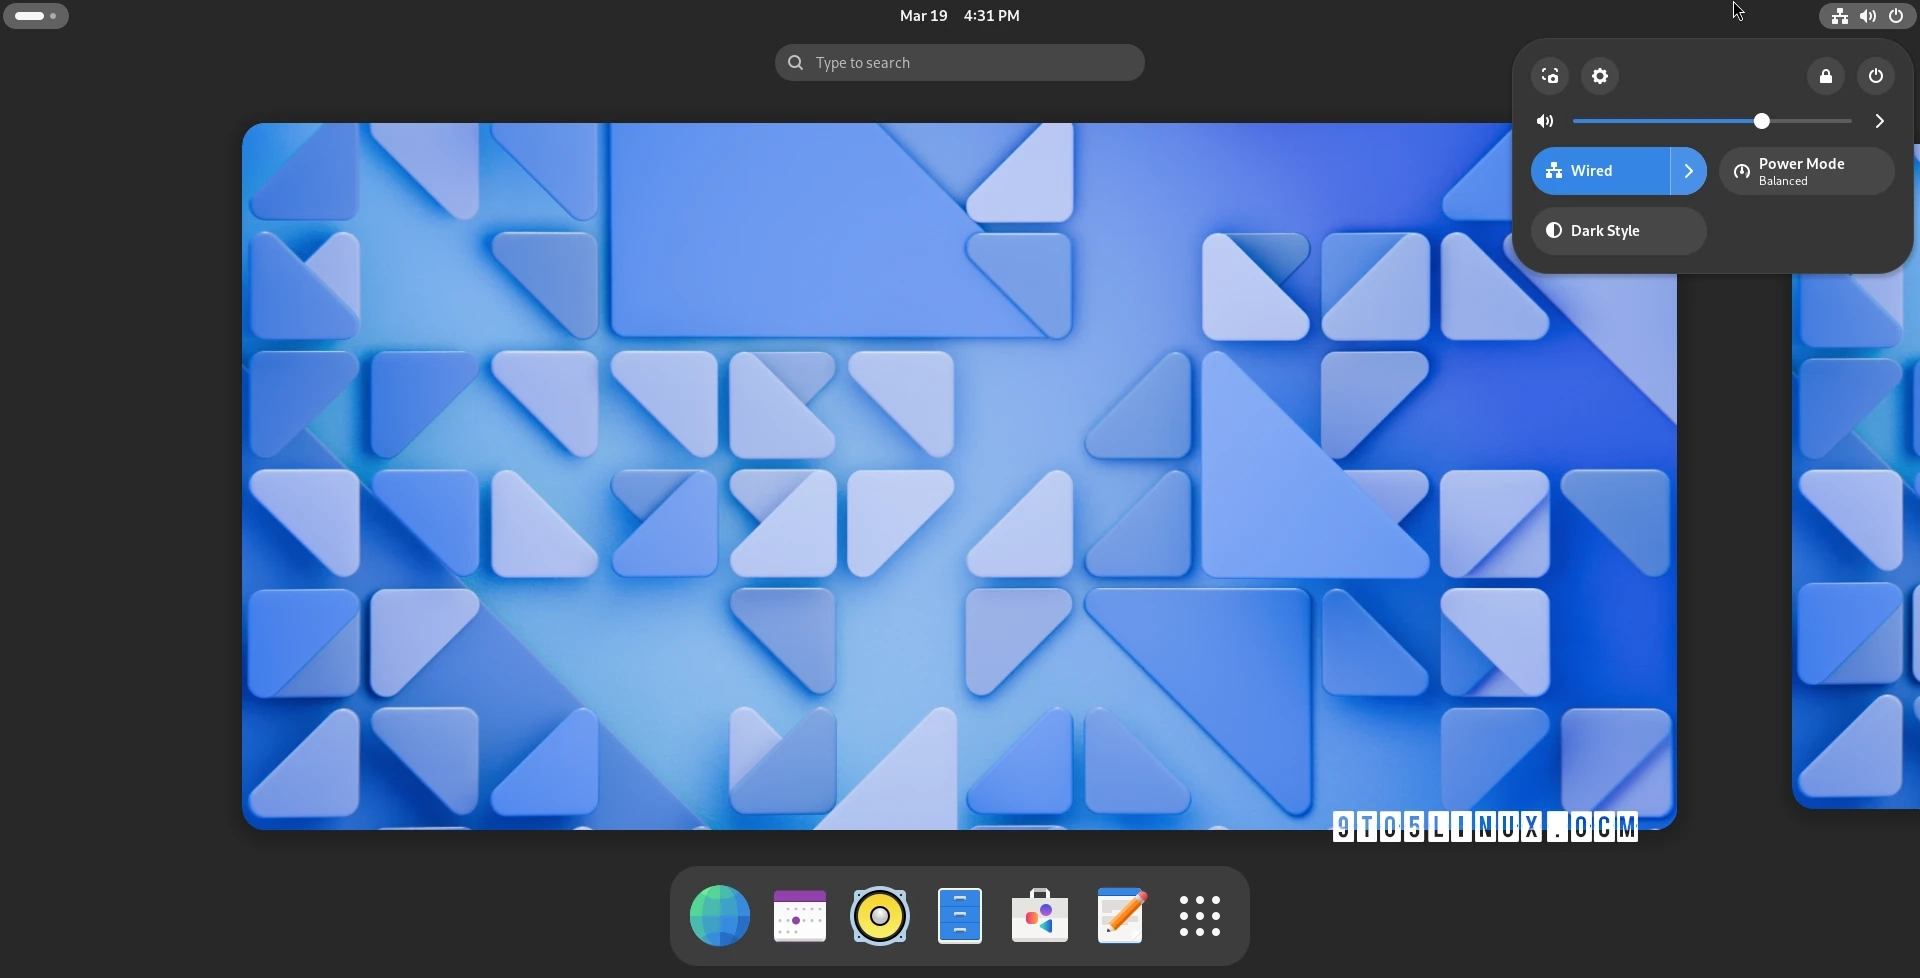 Introducing GNOME 46 “Kathmandu”: New Desktop Environment Release and Its Features